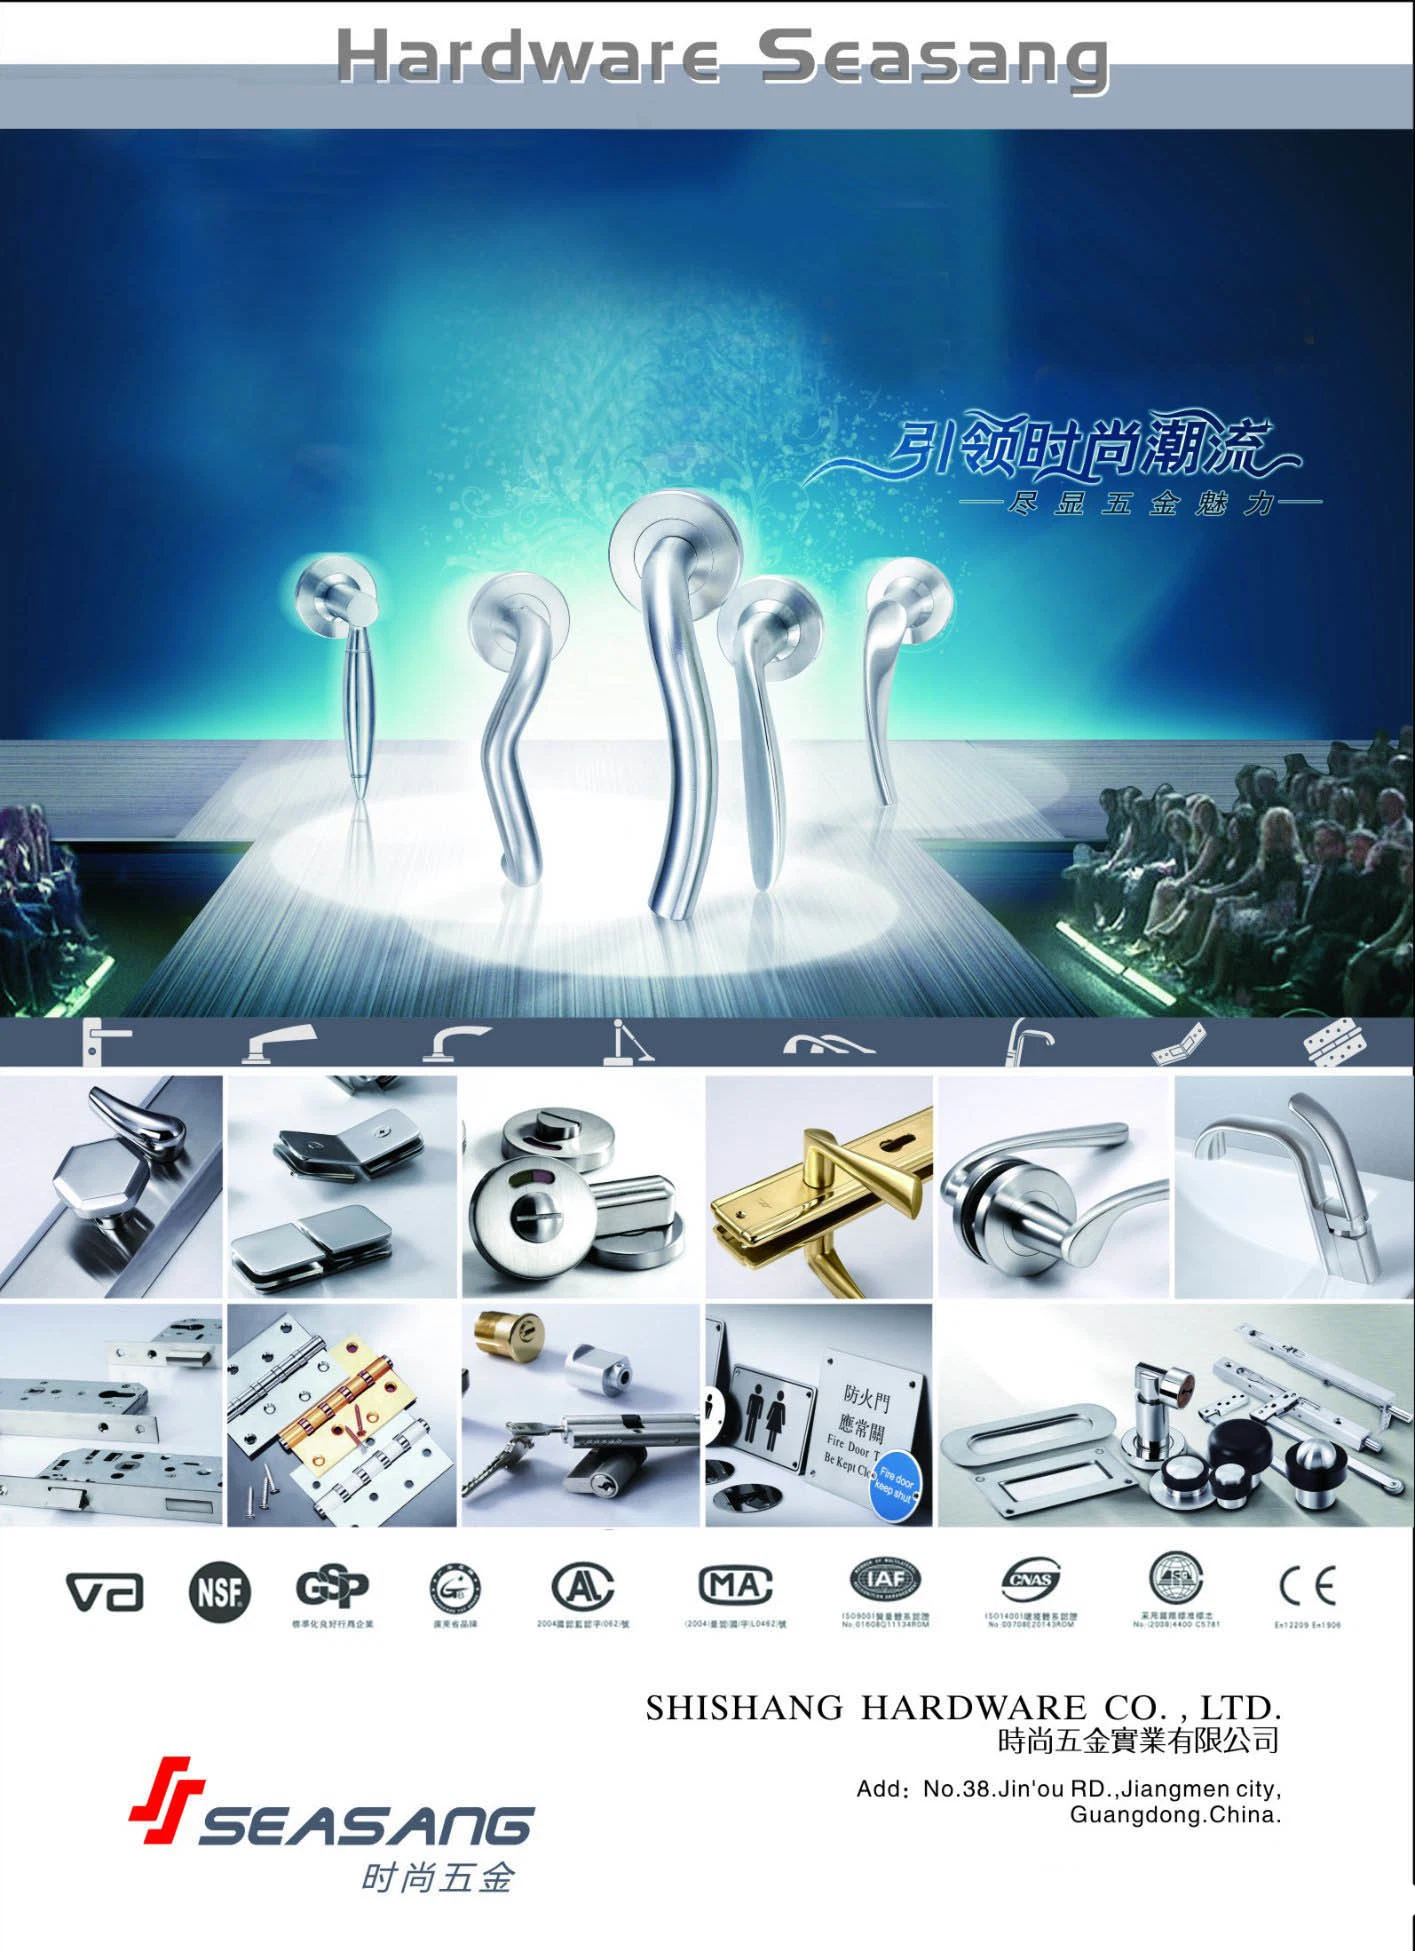 High quality/High cost performance Stainless Steel Pull Handle, Door Hardware Sh008